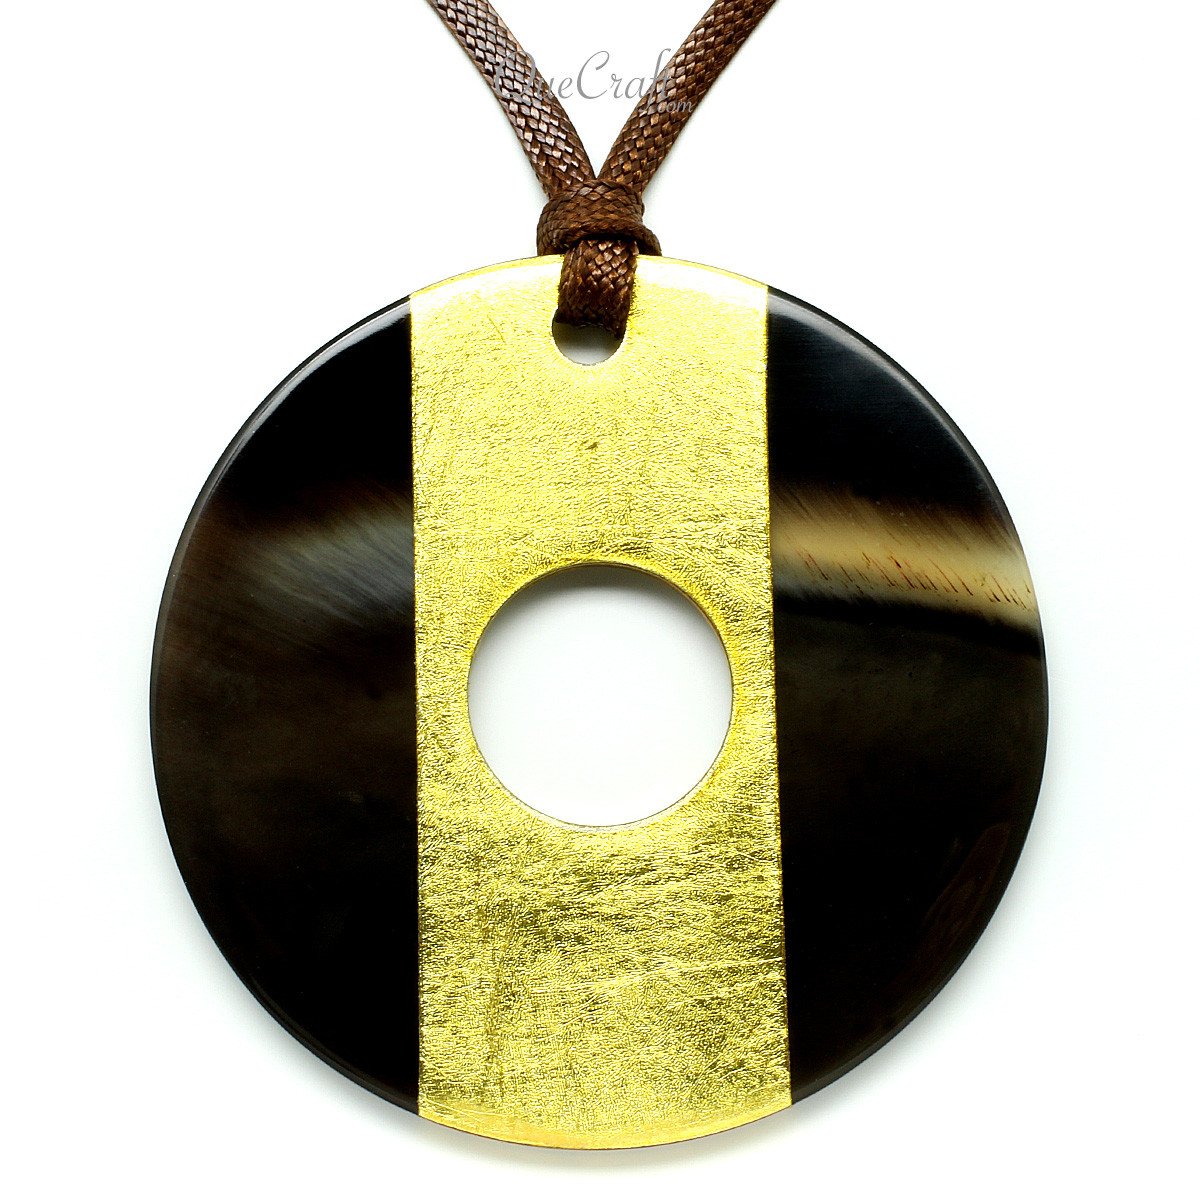 Horn & Lacquer Pendant #11714 - HORN JEWELRY